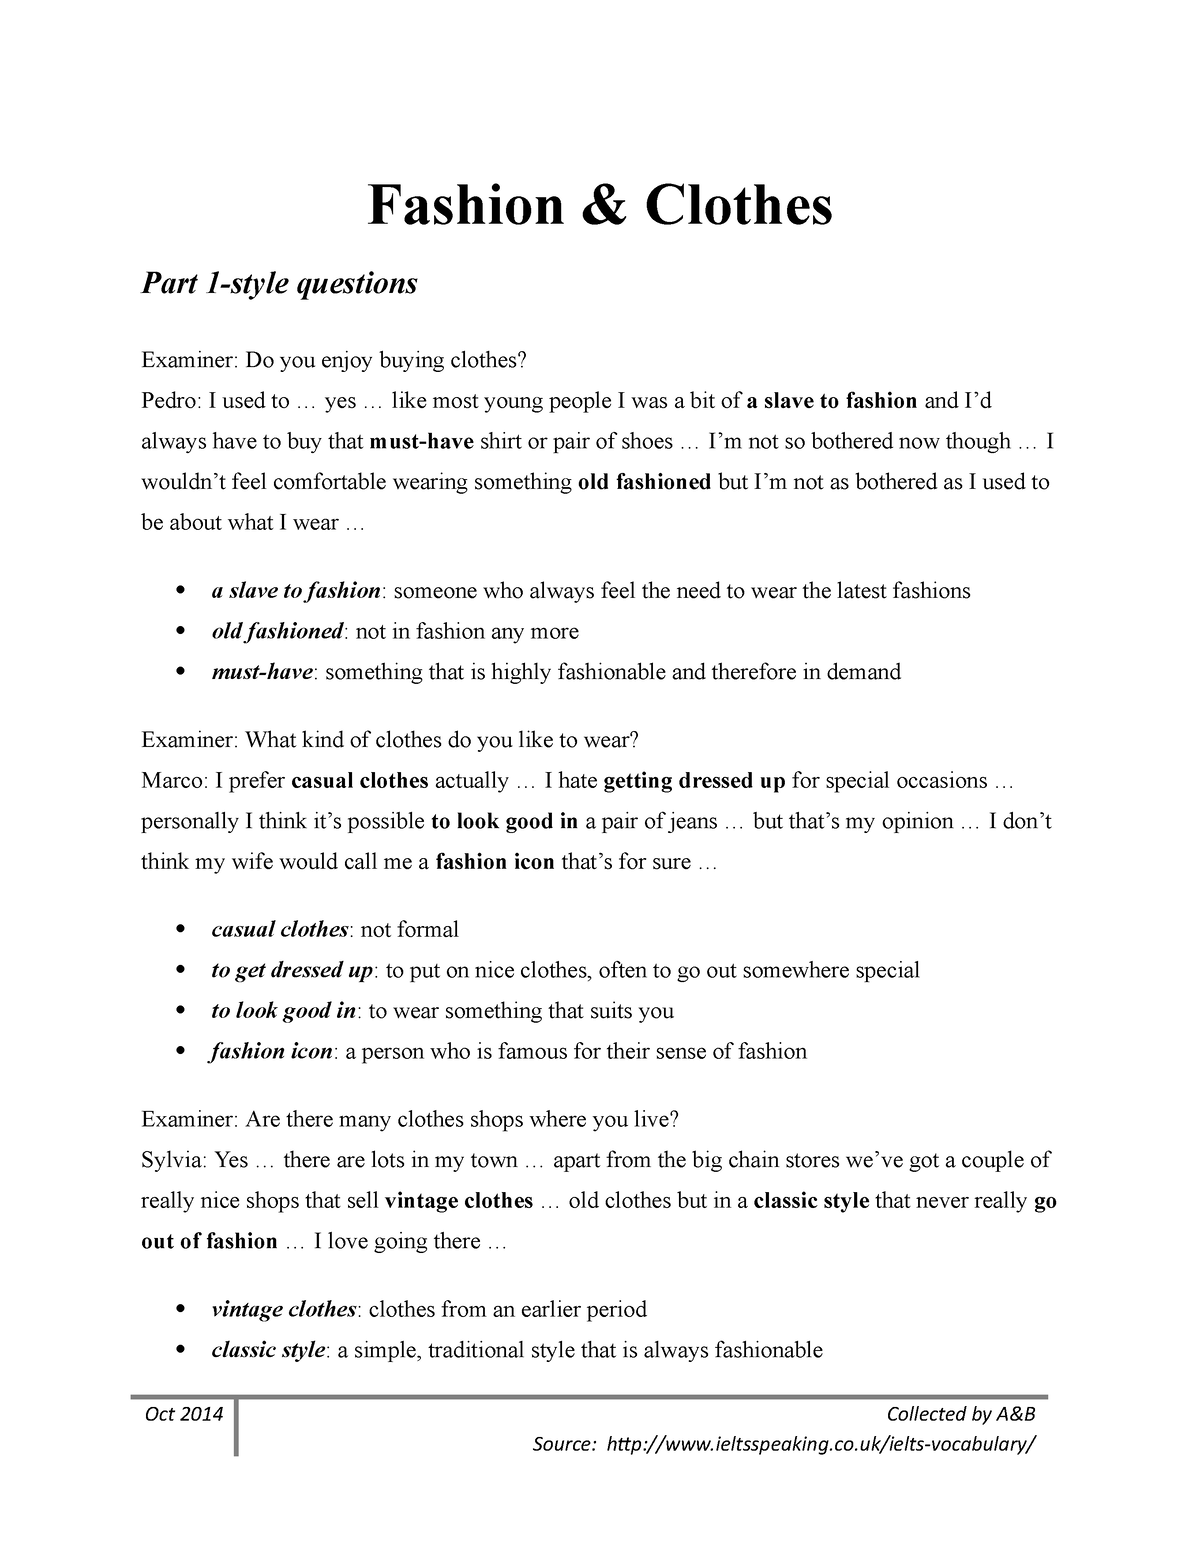 Fashion and clothes - Fashion & Clothes Part 1-style questions Examiner ...